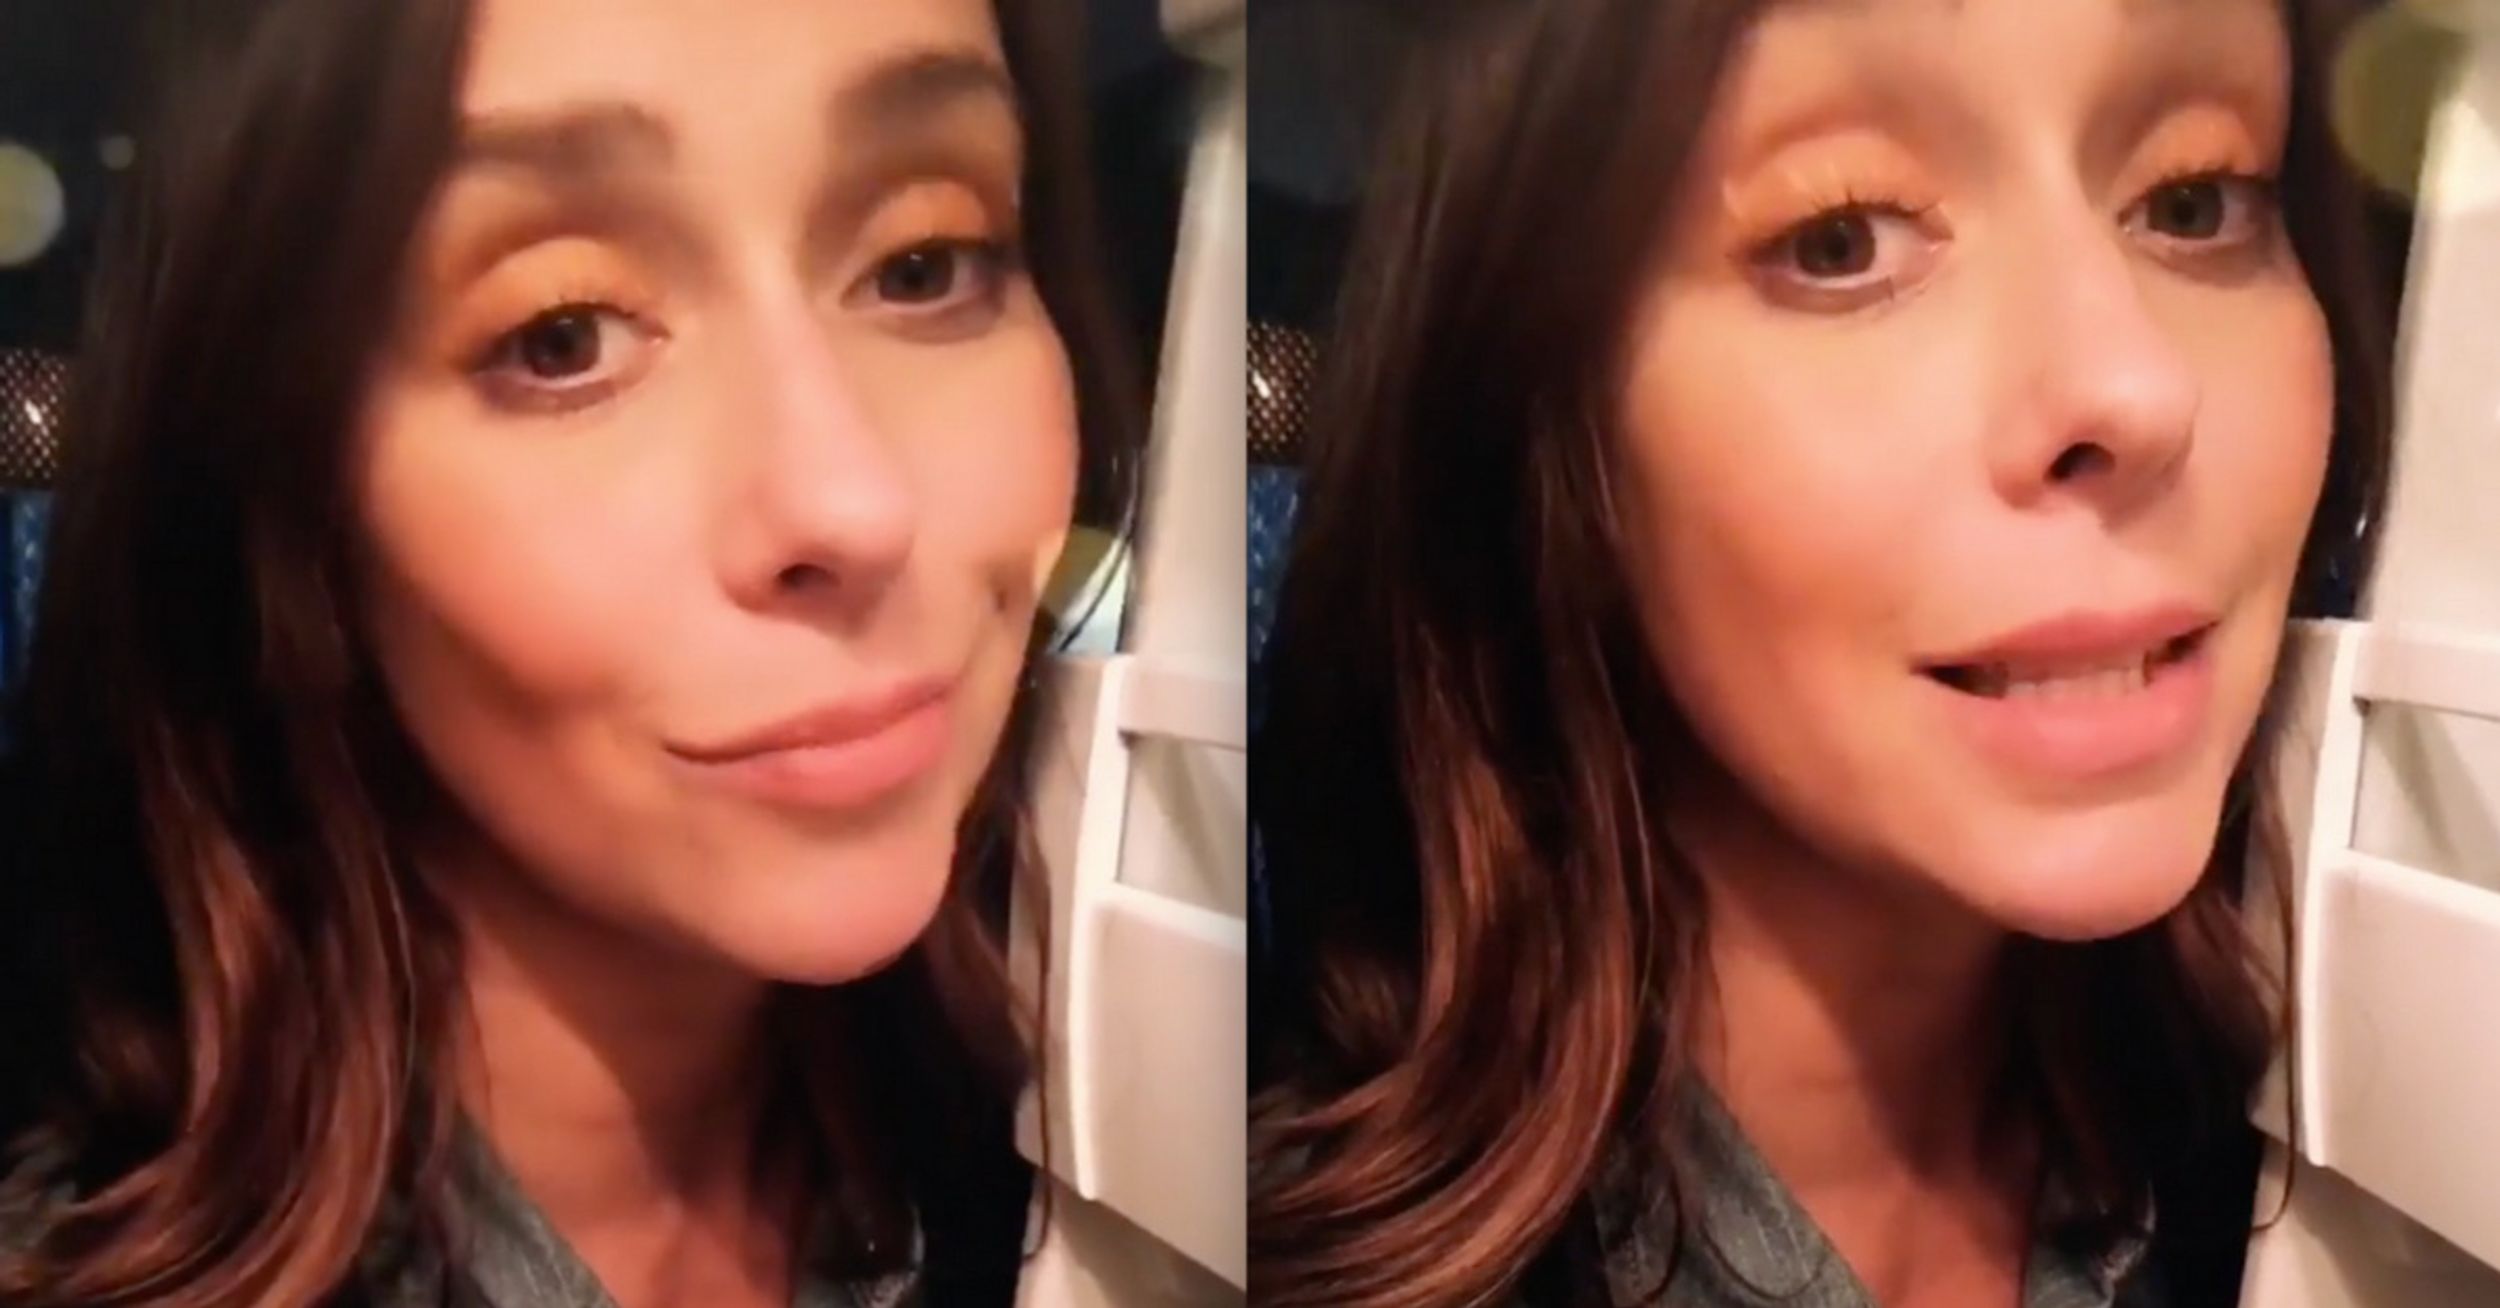 Jennifer Love Hewitt Takes Videos Inside Her Fridge Because The Lighting Is Better—And We're Obsessed 😂